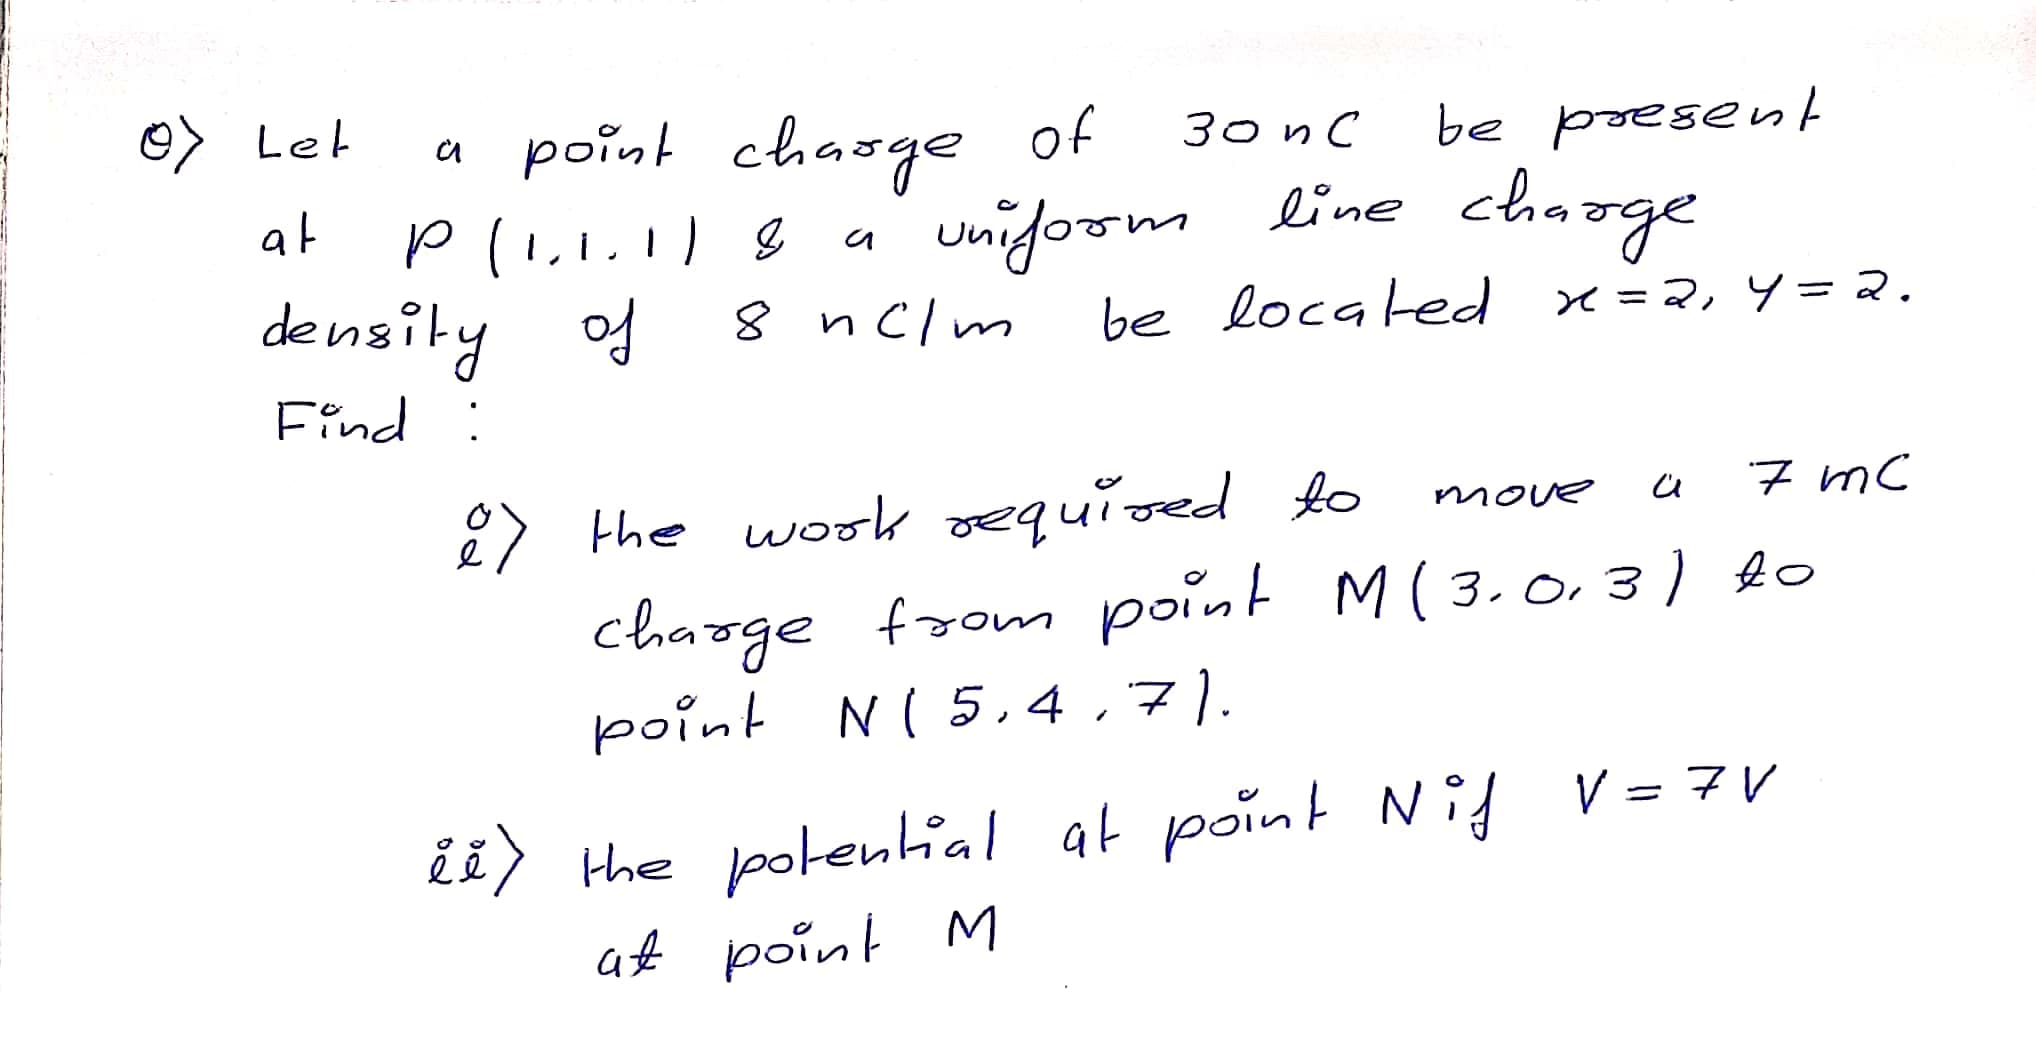 O> Let
a point chasge of
ЗоnС
be present
unifoom line chaoge
8 nclm
at
density of
be located x=2, y=2.
Find :
2) the wook required to
charge
point N( 5,4,7|).
7 mC
move
from point M( 3.0,3) to
ii) the potenial at point Nig V = 7V
af point M
at point Nif V= 7V
